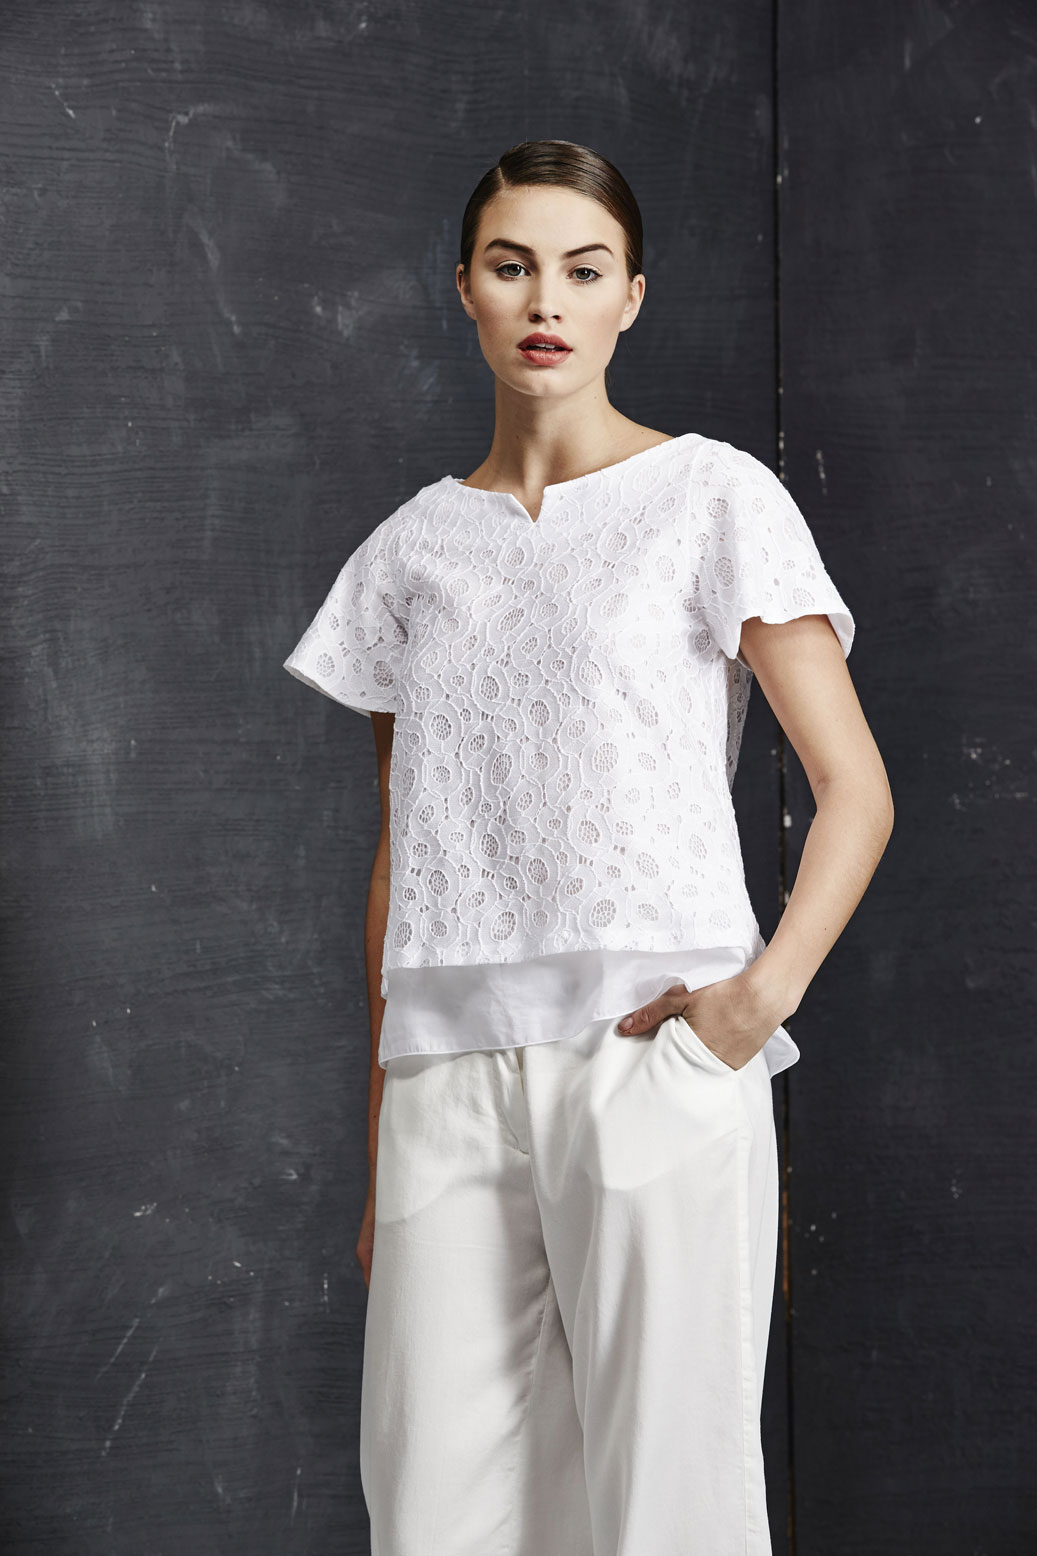 This model wears a blouse in cotton and macramè lace on a loose-fitting flowing trousers